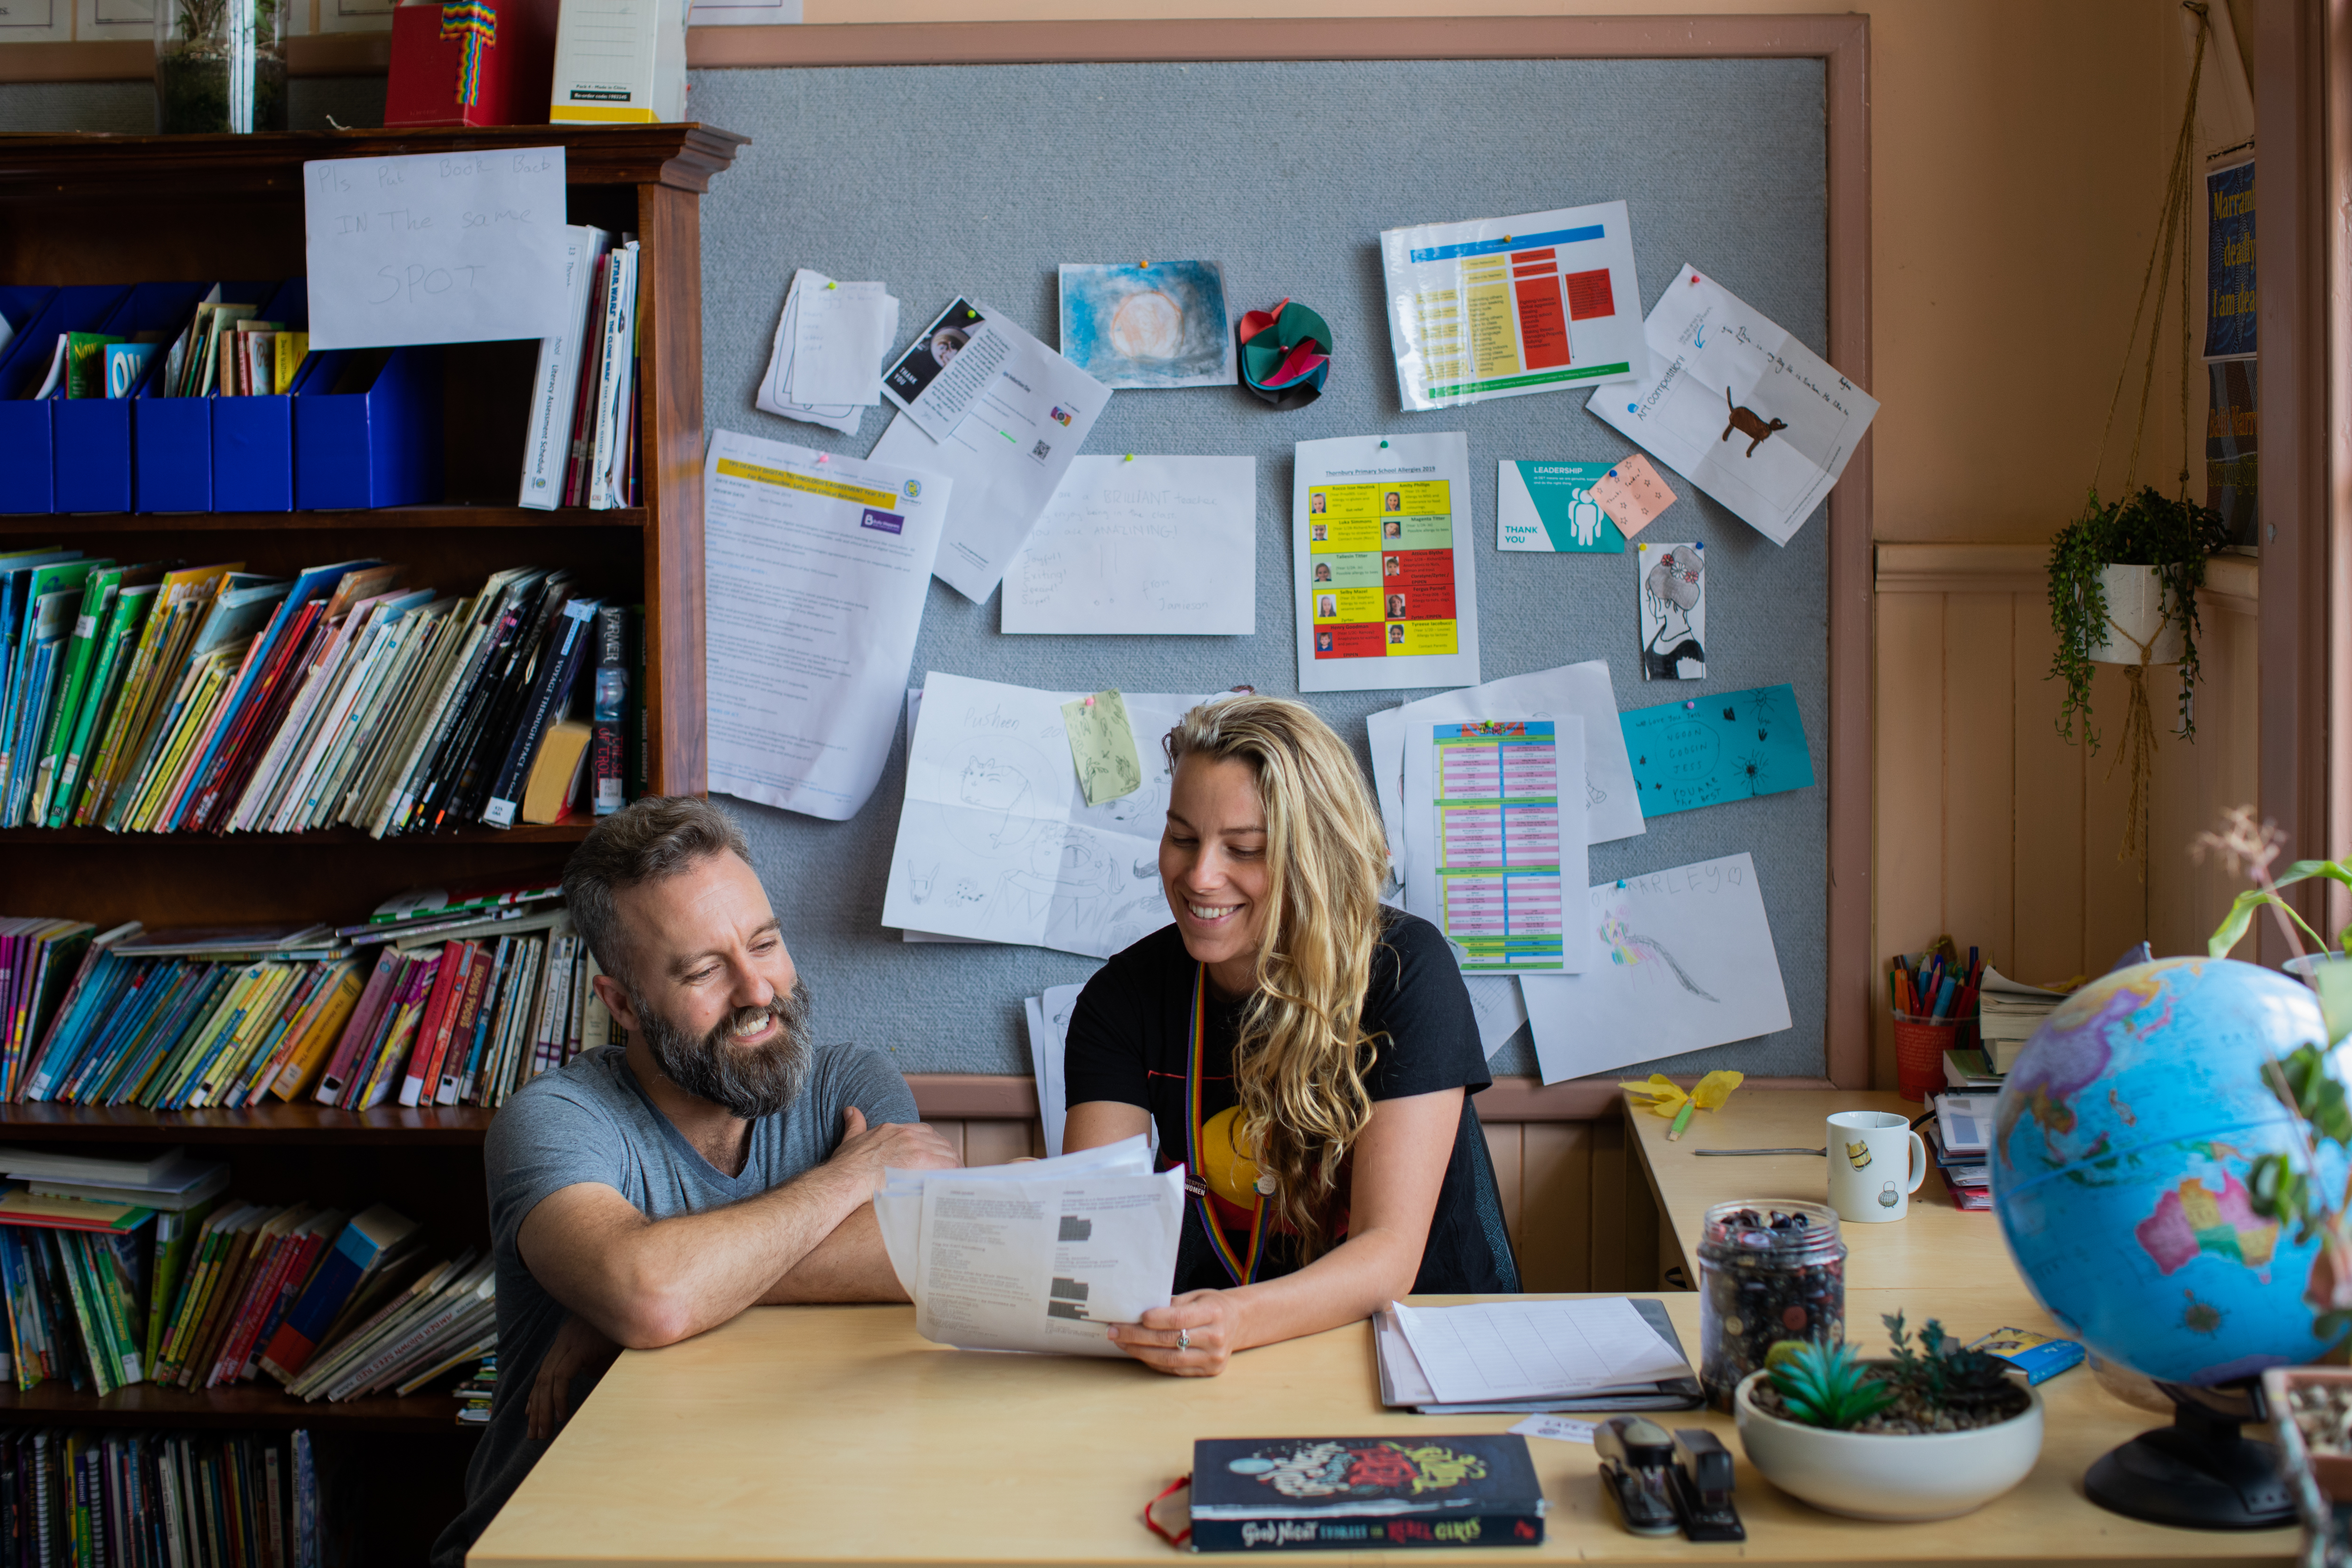 Two educators at a desk in a classroom looking at some pieces of paper together.